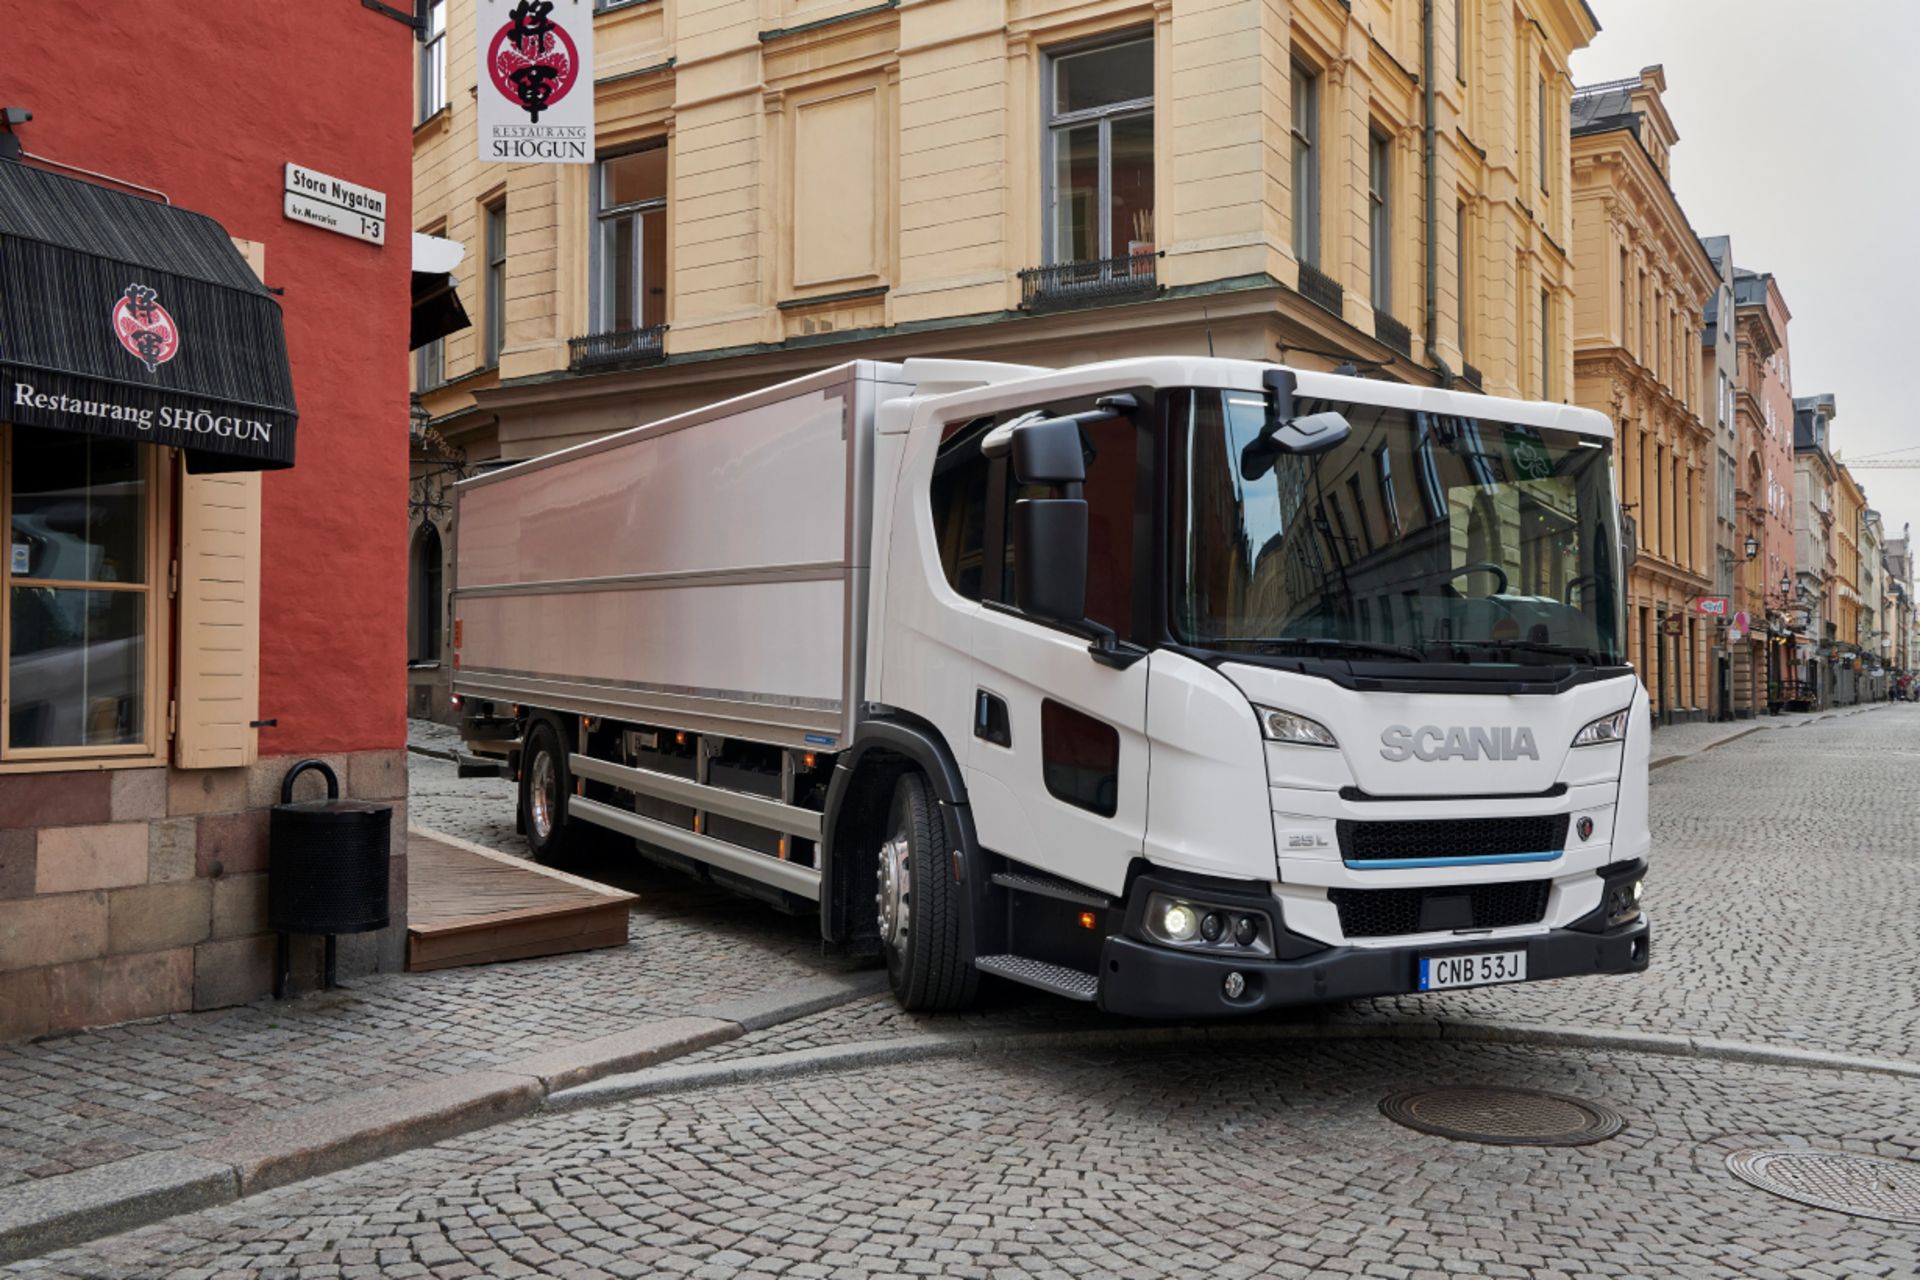 SCANIA truck drives in a small street in the old town of Stockholm